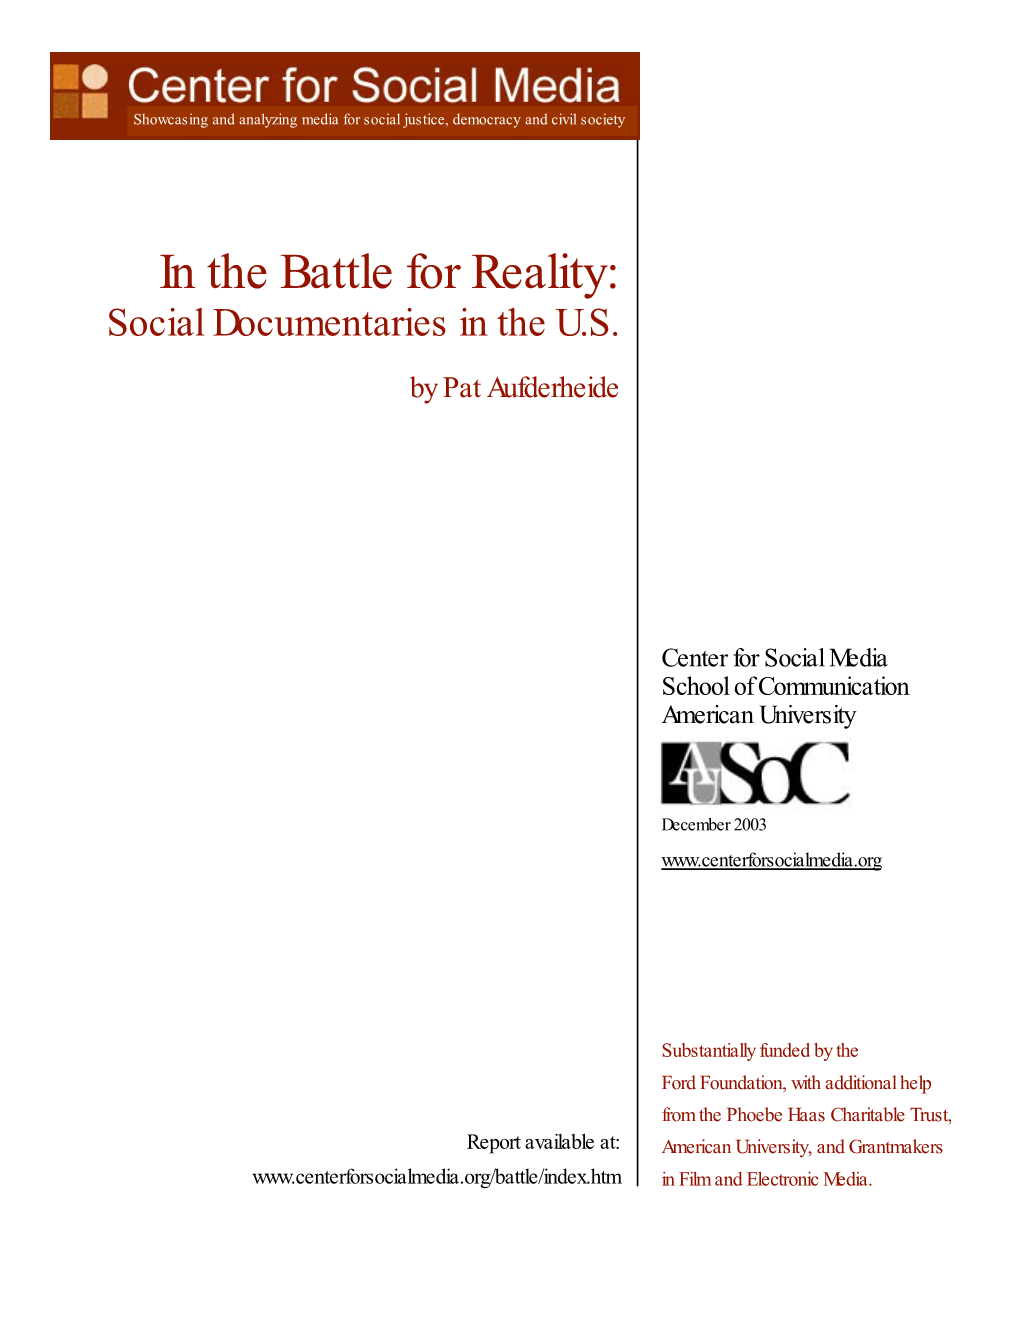 In the Battle for Reality (PDF)